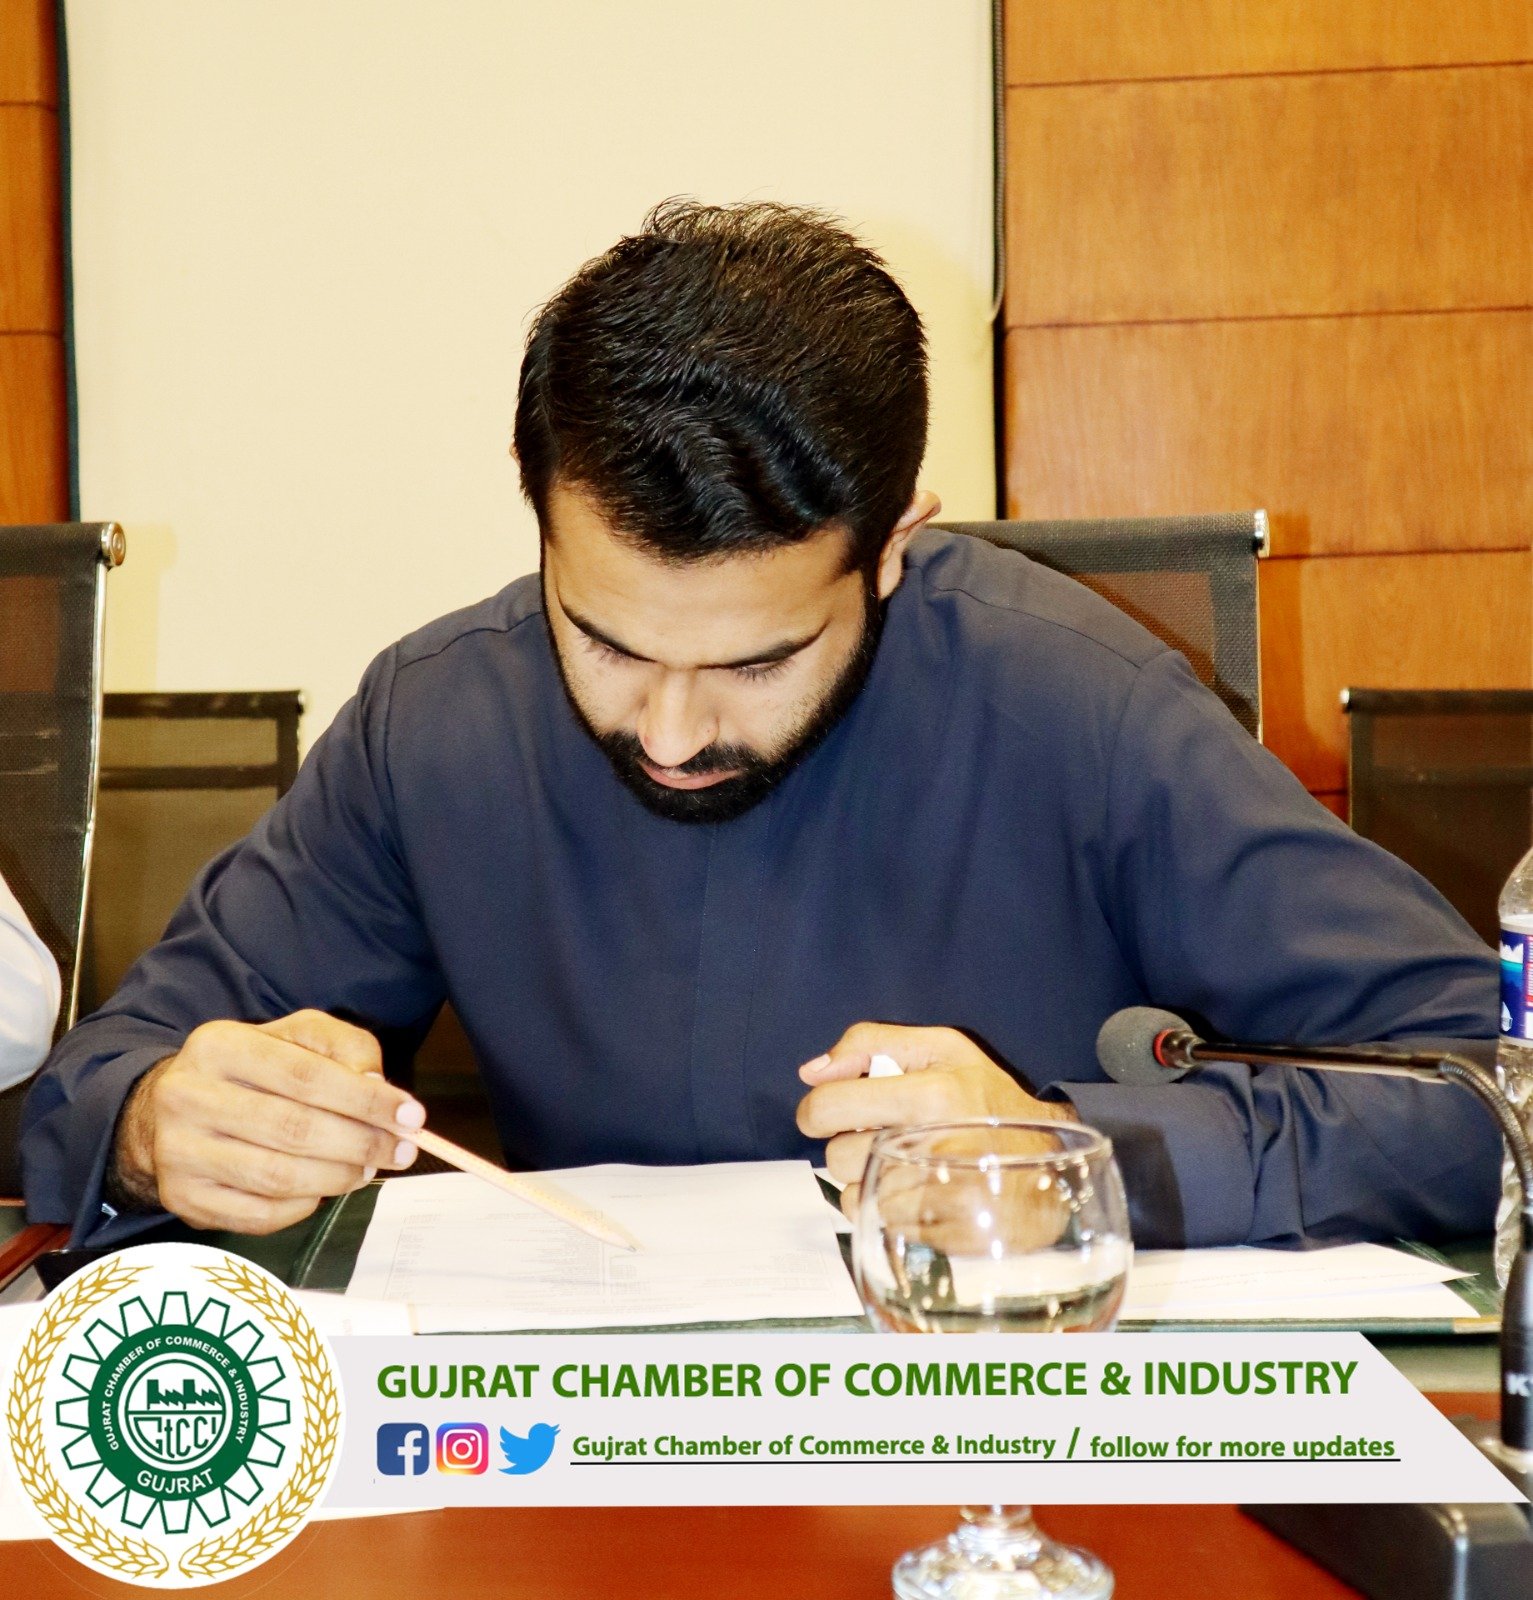 The #21st #Executive_Body Meeting of Gujrat Chamber of Commerce & Industry was held under the presidency of Mr. Sikander Ishfaq Razi #President #GtCCI along with Mr. Ch. Muhammad Asad Bhatti #SVP. Mr. Muhammad Masoom Qamar #VP #GtCCI . In the meeting, previous proceedings and accounts were approved and other agenda points were discussed.